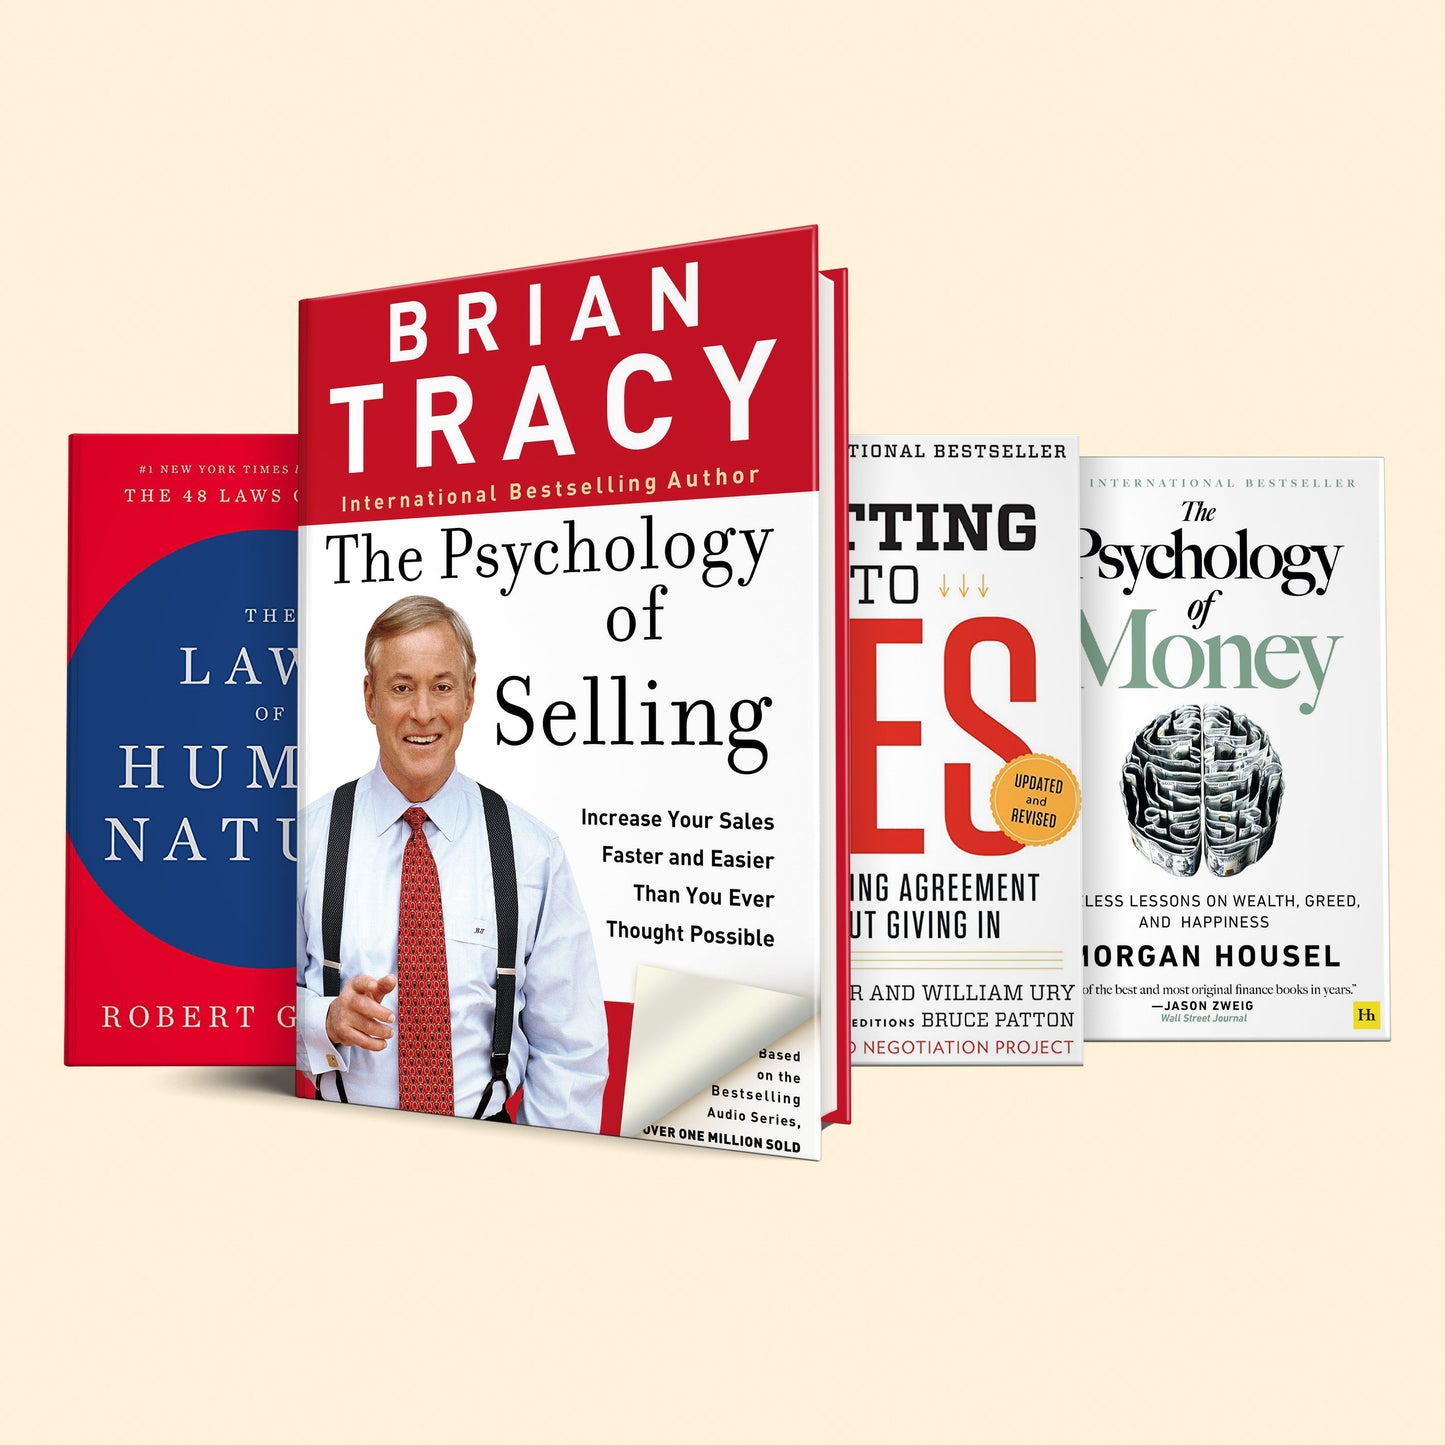 The Mindset Mastery Collection to Transform Your Approach to Selling, Money, and More : The psychology of selling, getting to a yes, laws of human nature, the psychology of money